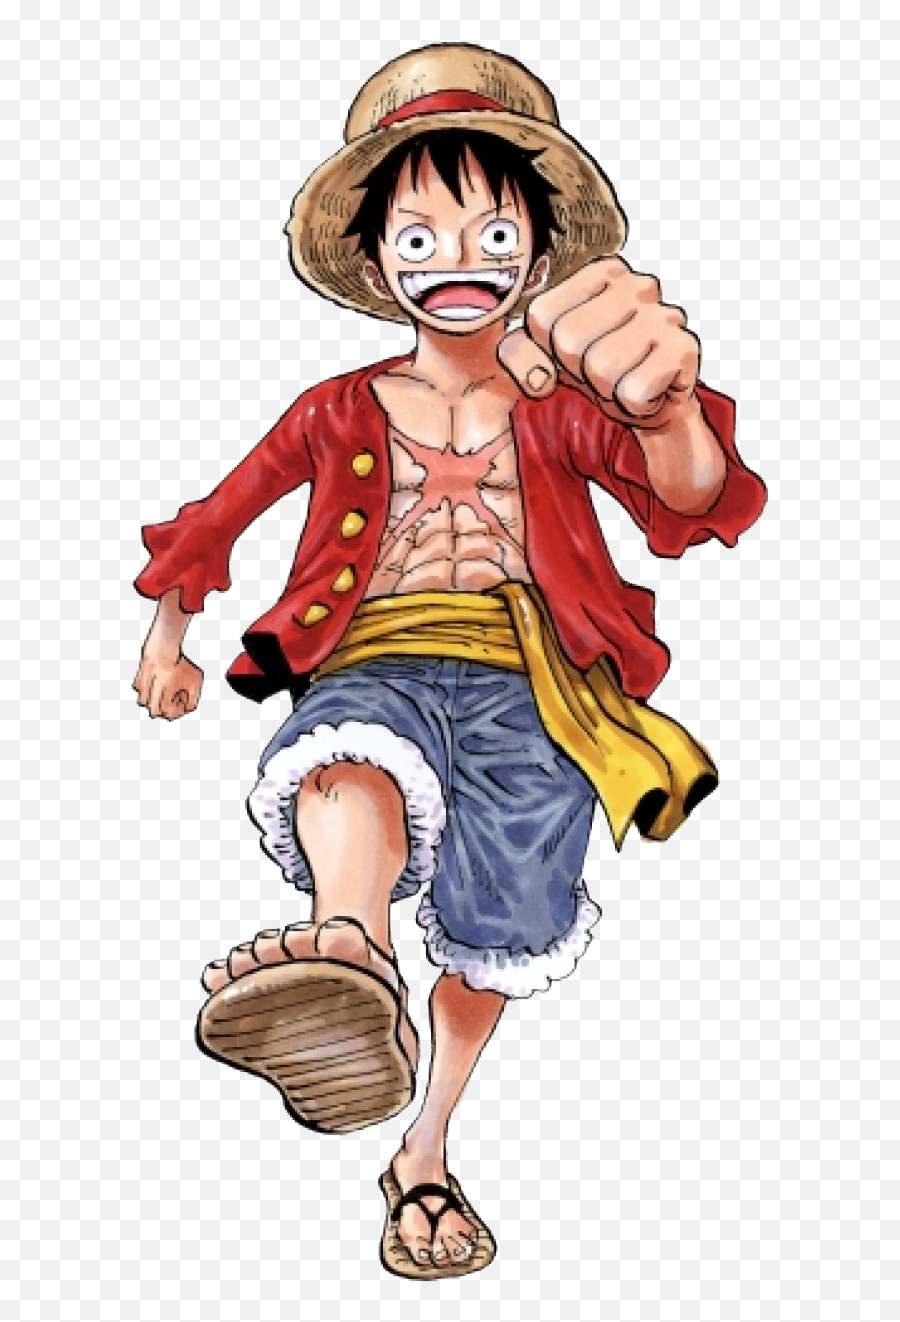 Download Monkey D Luffy Timeskip - Luffy Png One Piece Timeskip,Monkey D Luffy Png